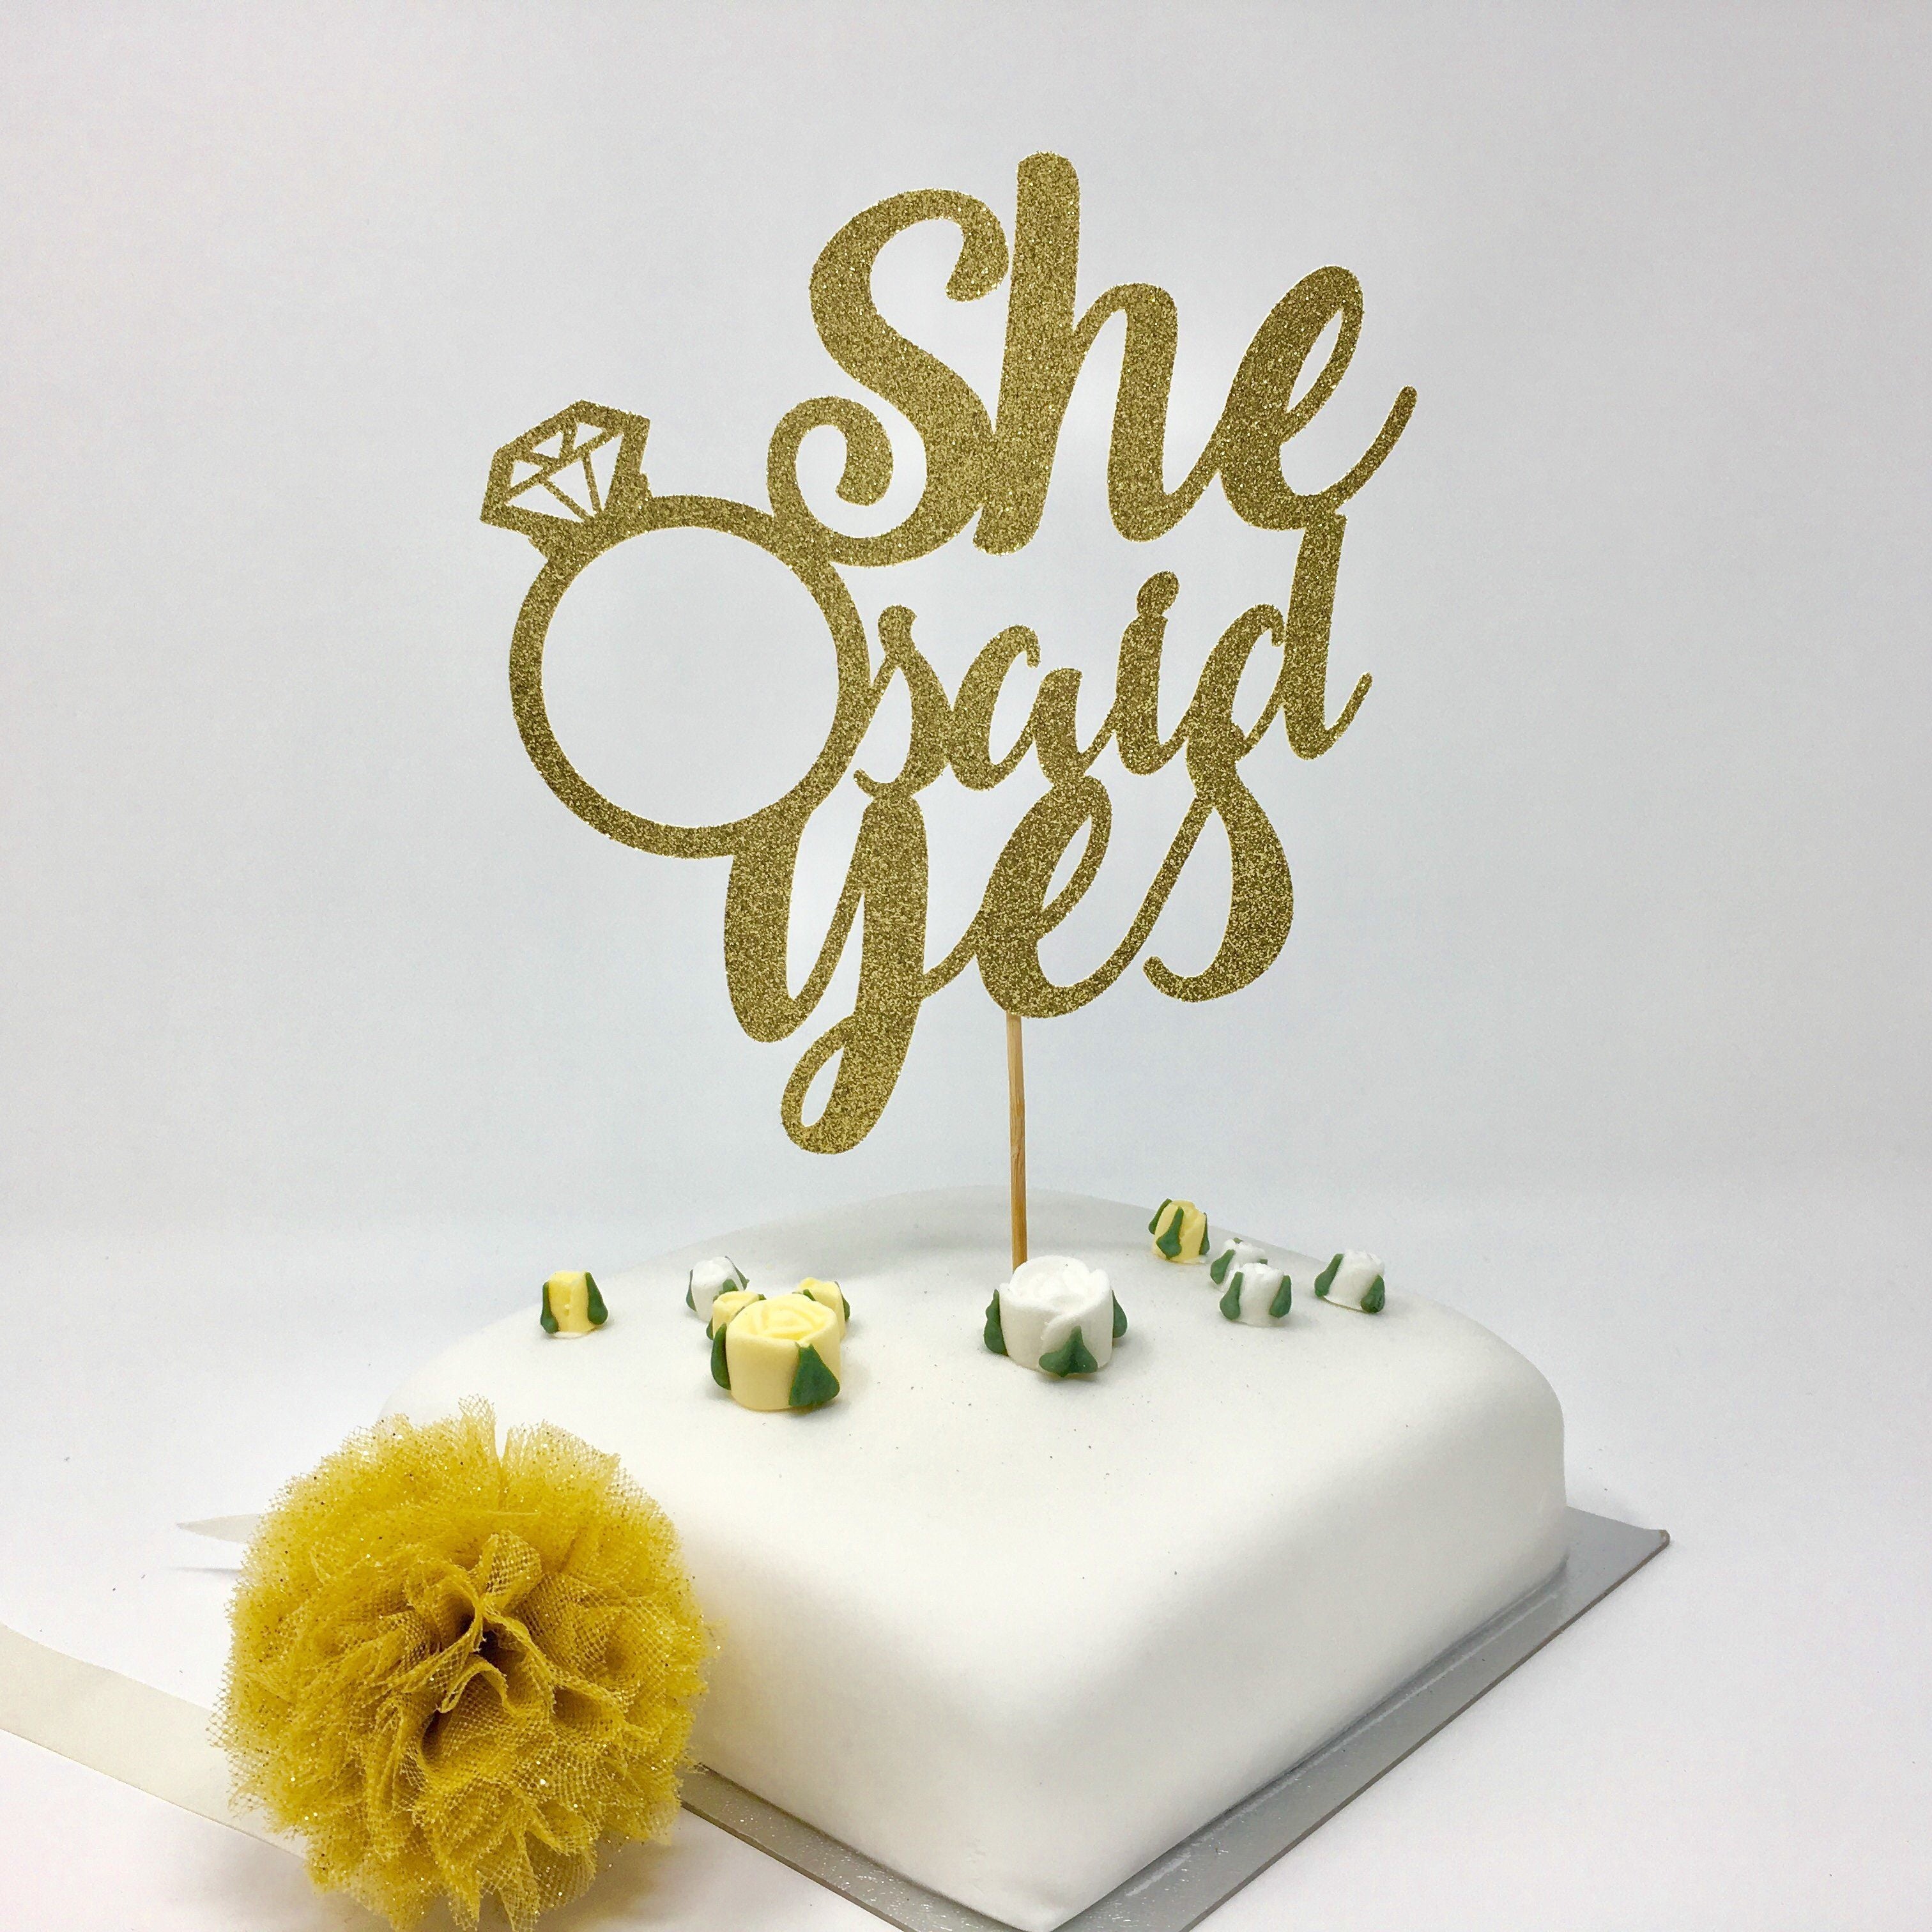 She Said Yes Cake Topper. Engagement Party Decorations